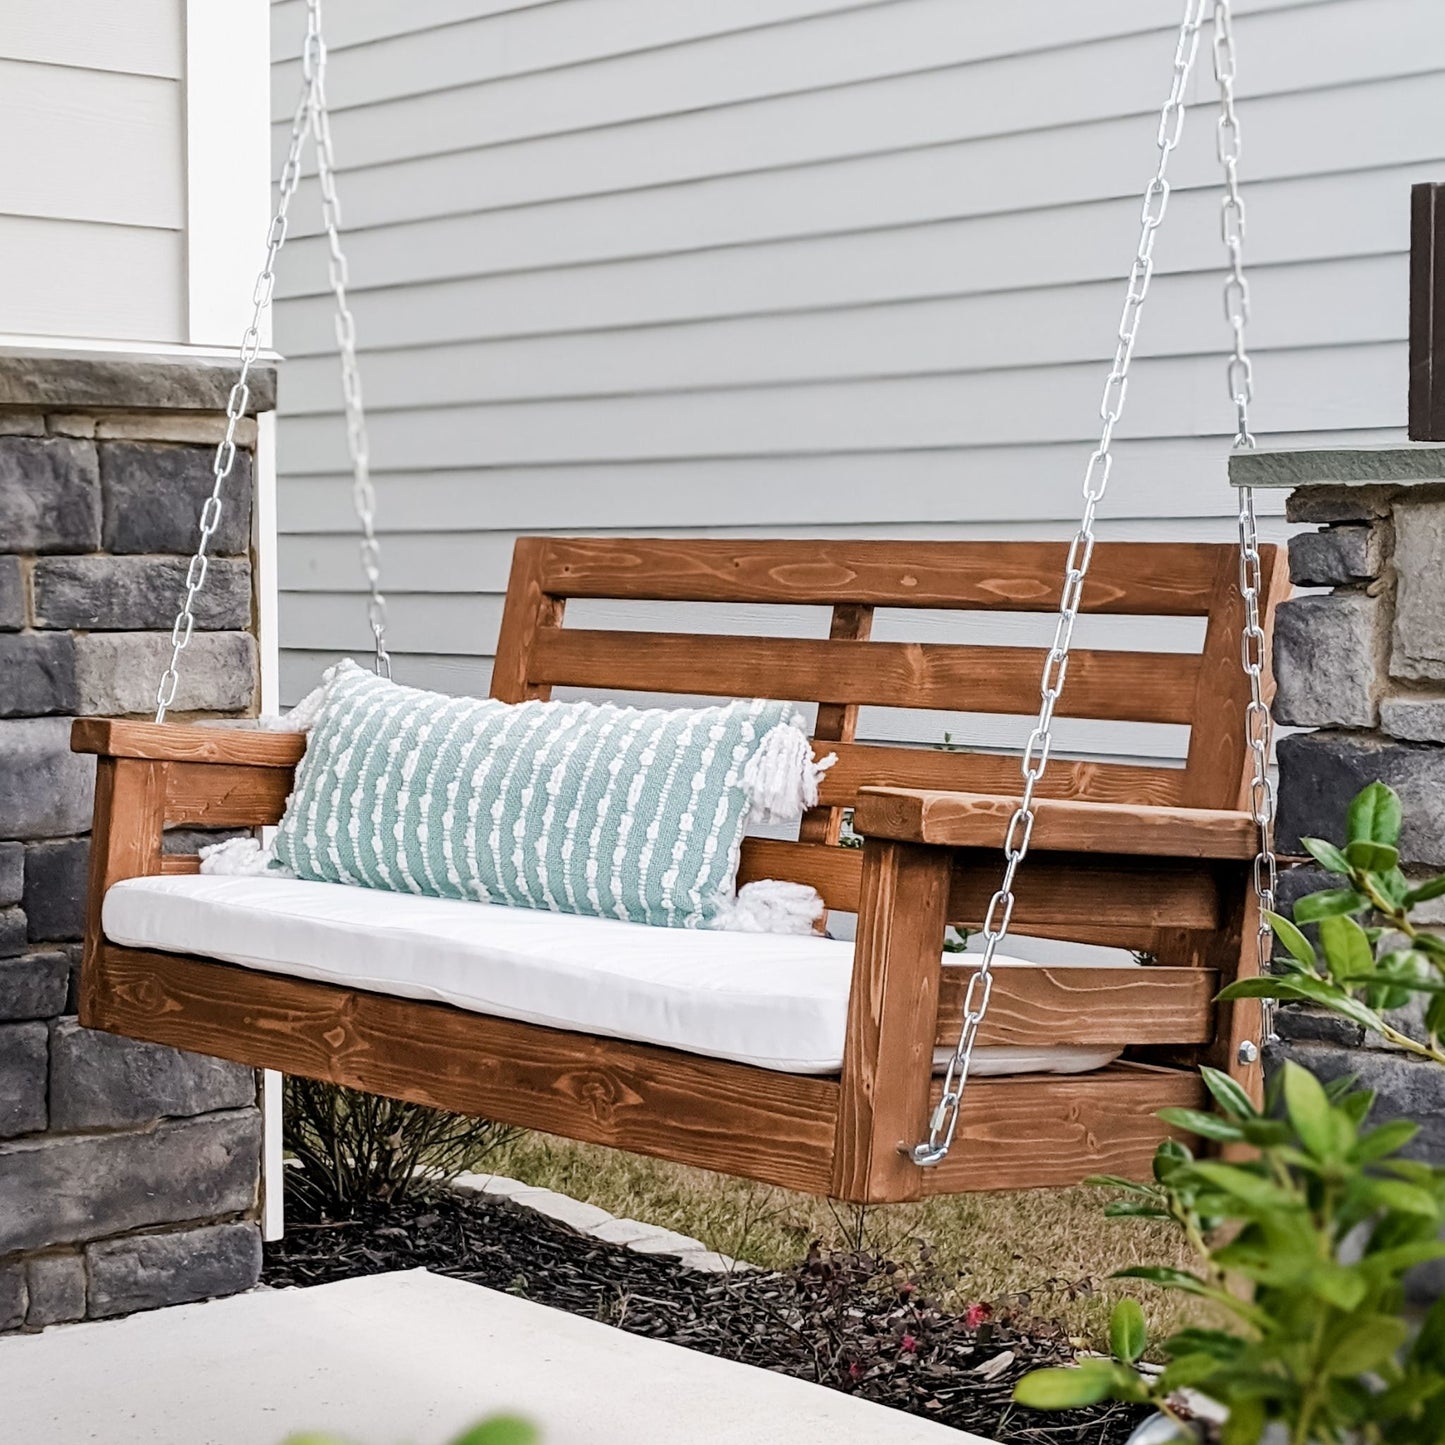 Small Porch Swing Printable Plans